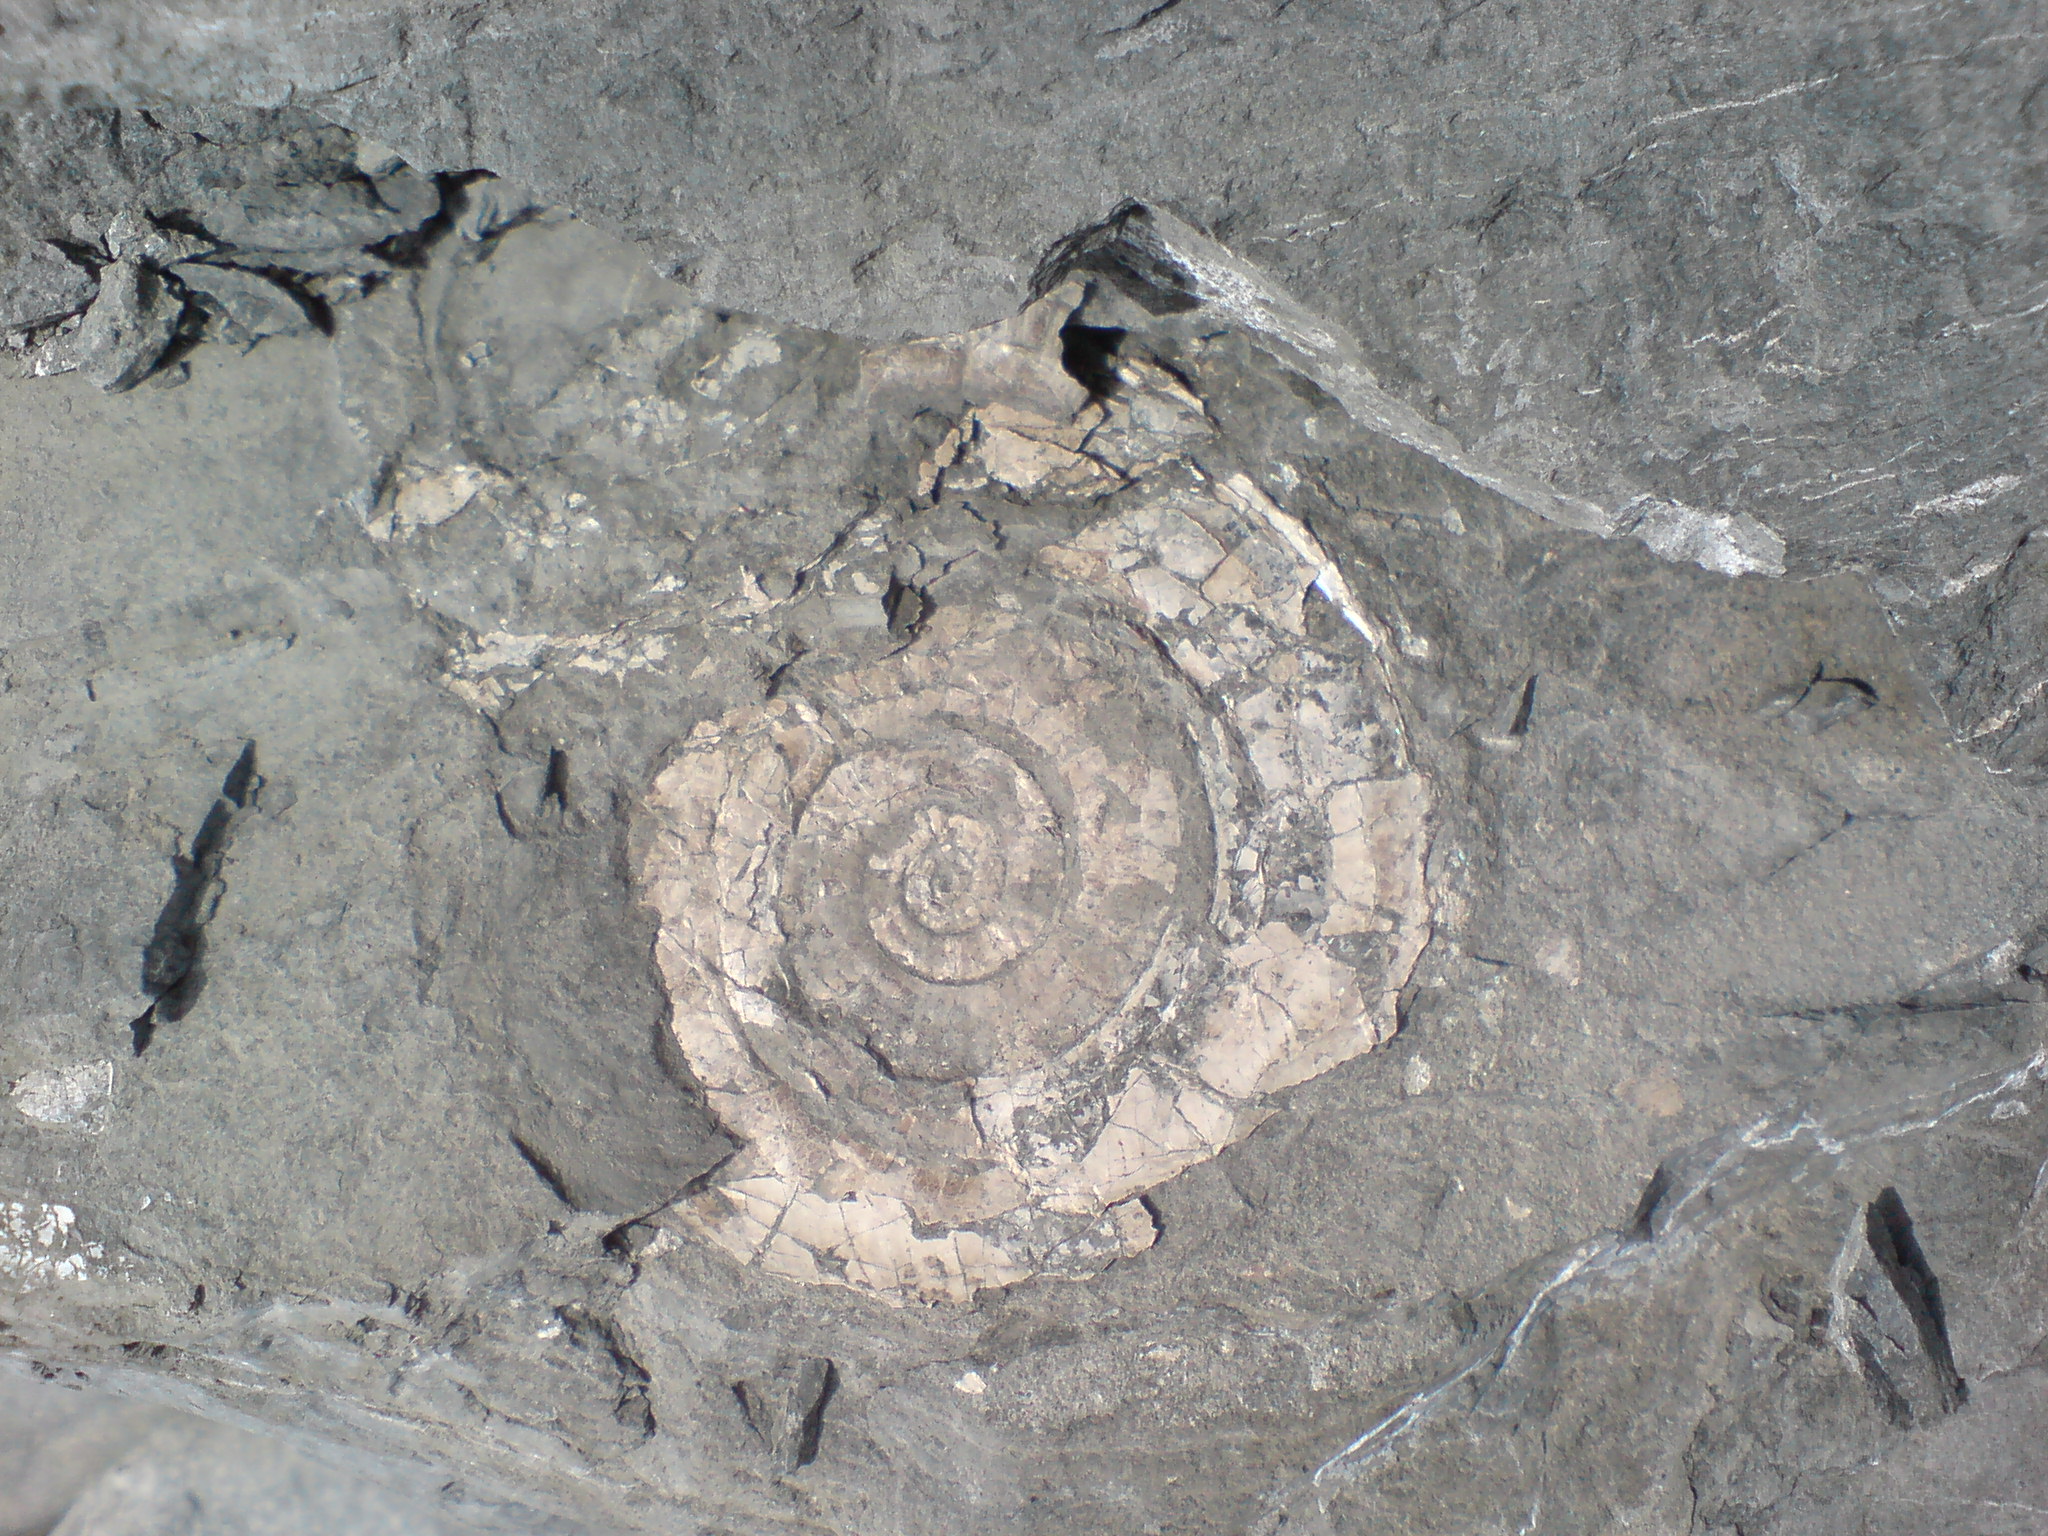 this rock is a large and interesting spiral